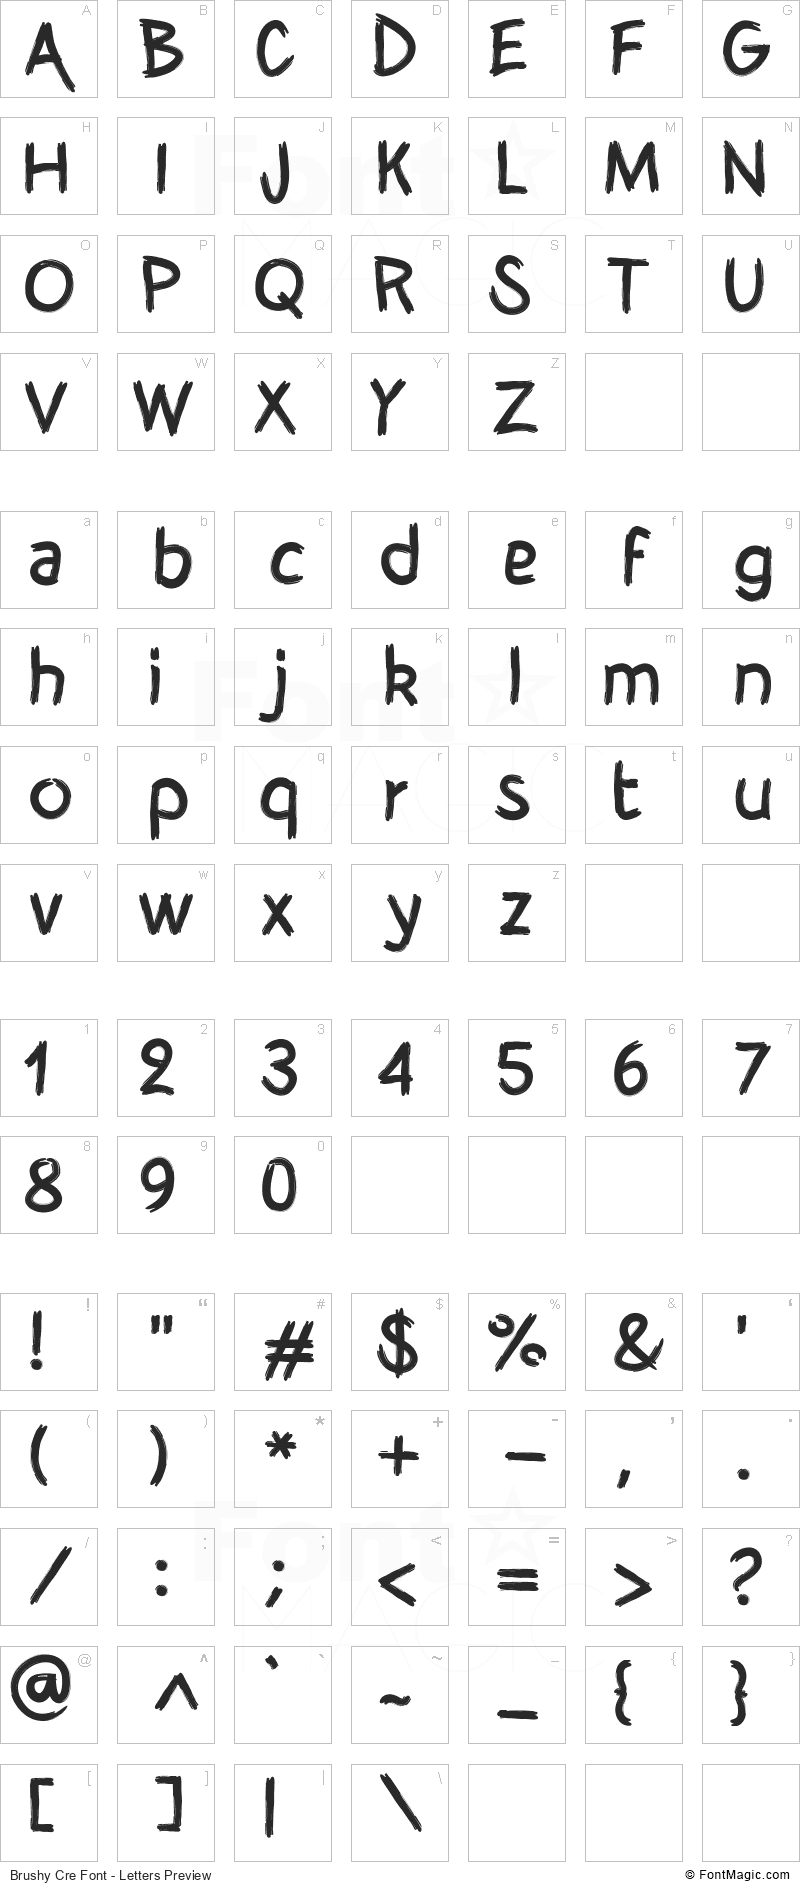 Brushy Cre Font - All Latters Preview Chart